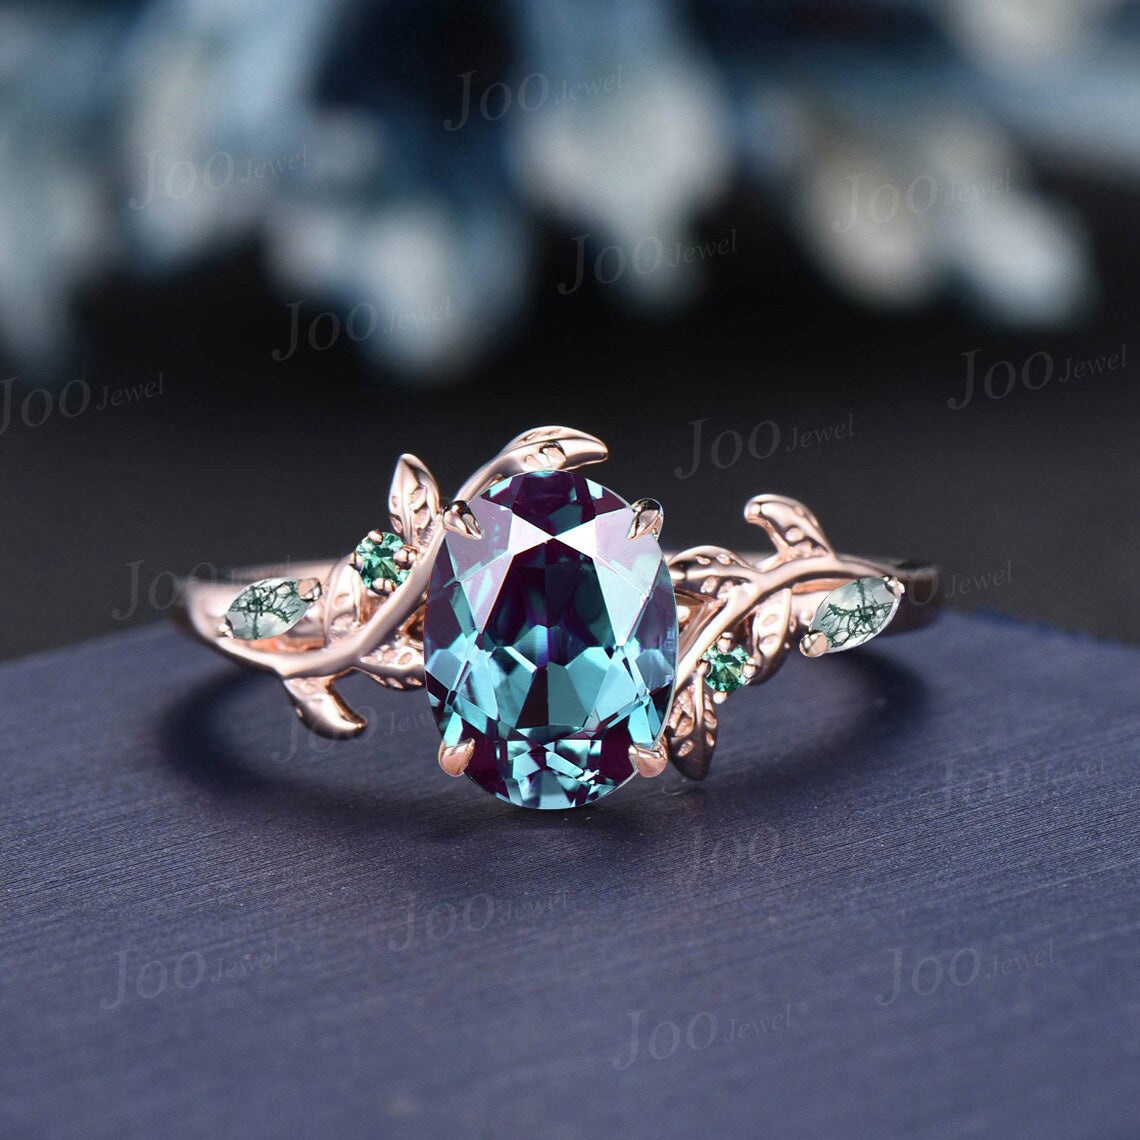 1.5ct Oval Alexandrite Moss Agate Bridal Ring Set Branch Leaf Vine Color-Change Alexandrite Engagement Ring Unique Wedding Anniversary Gifts